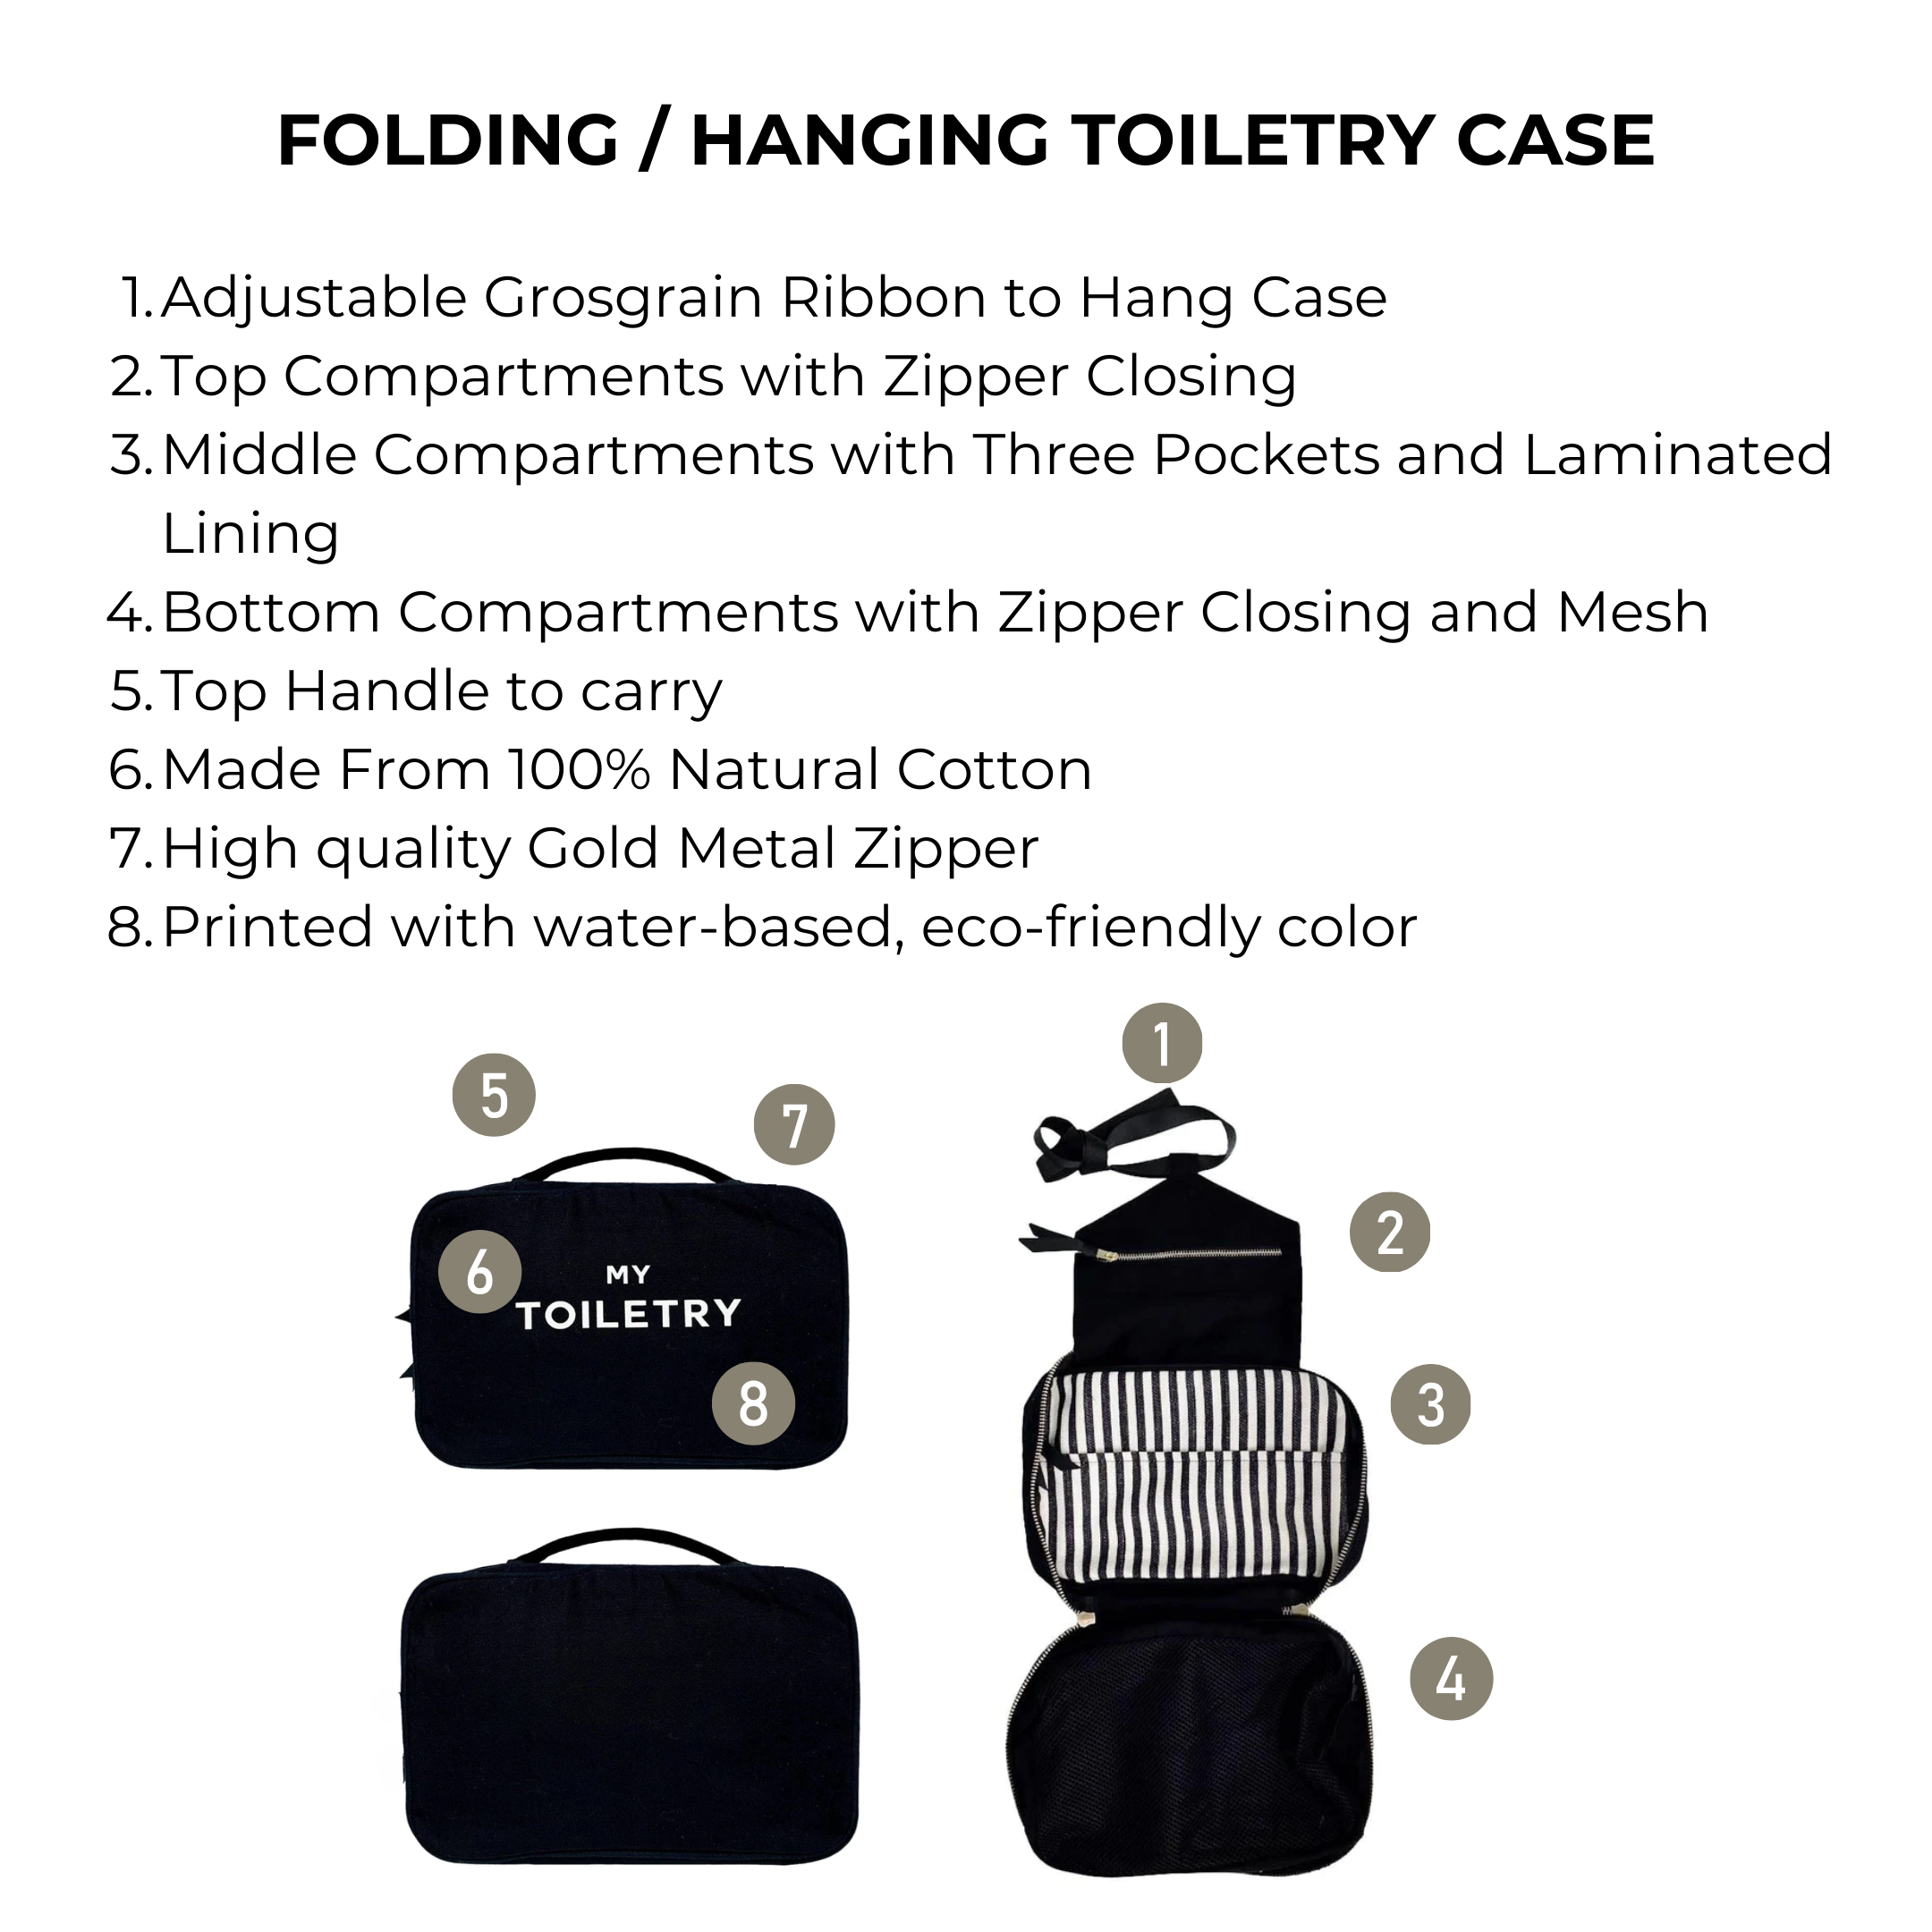 Folding/Hanging Toiletry Case, Black | Bag-all